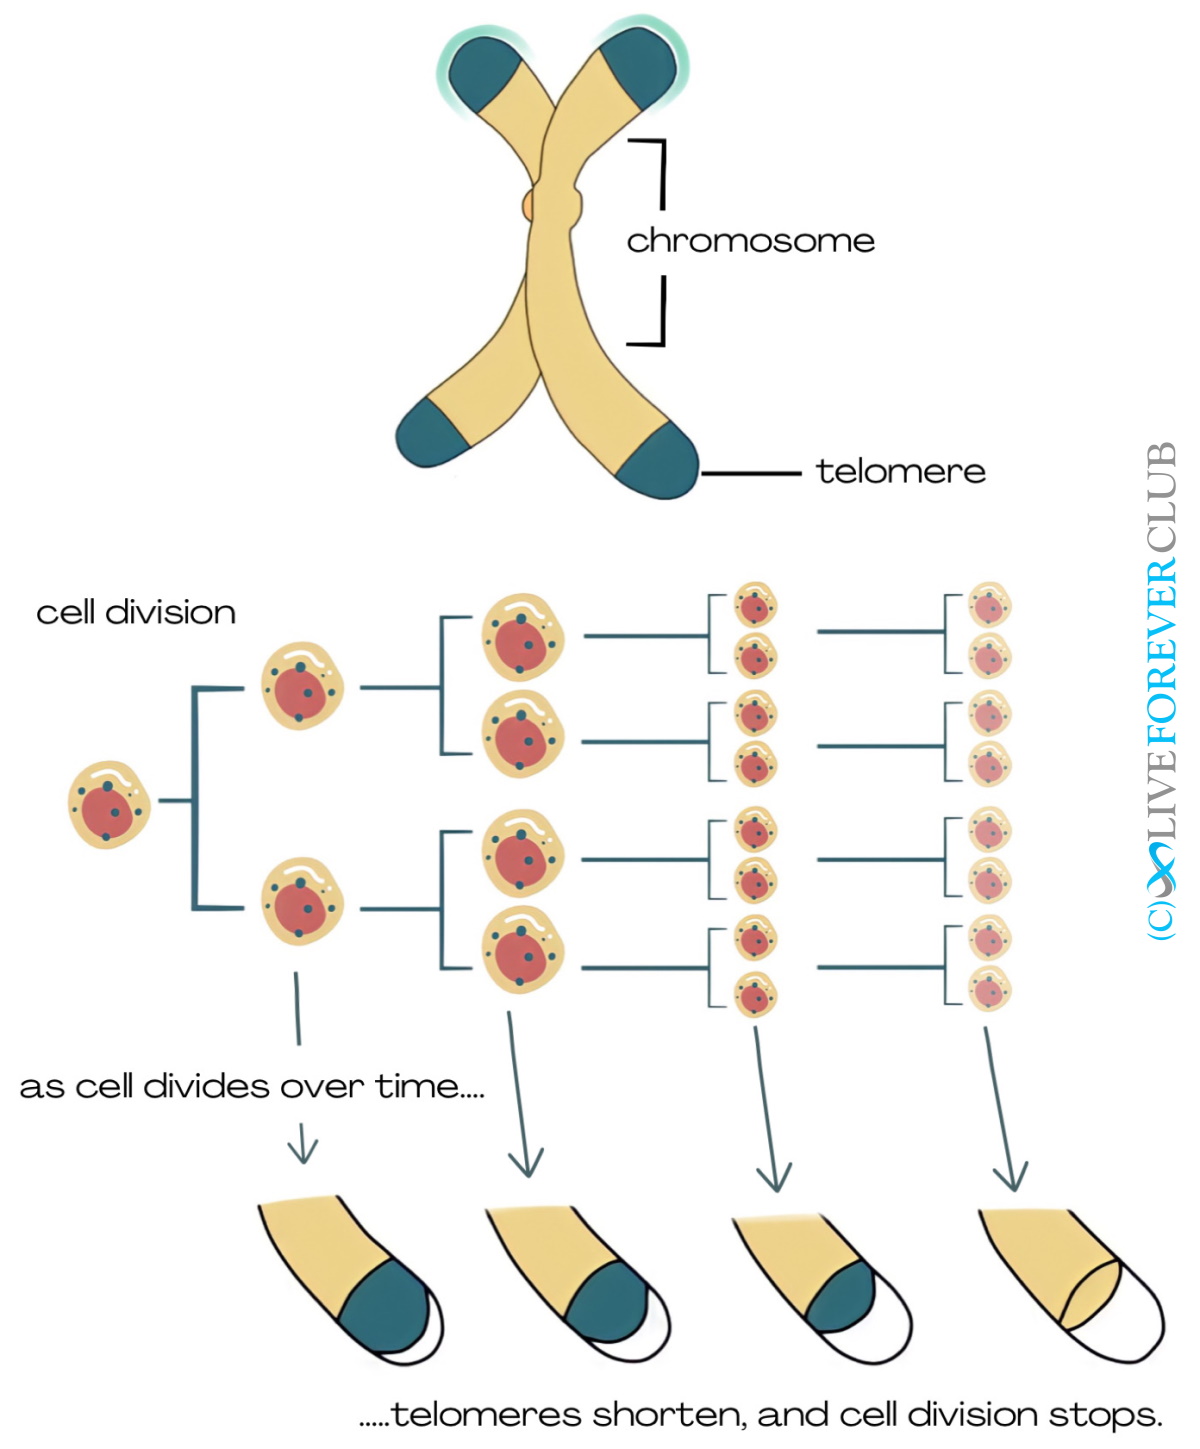 telomeres shortening due to cell division